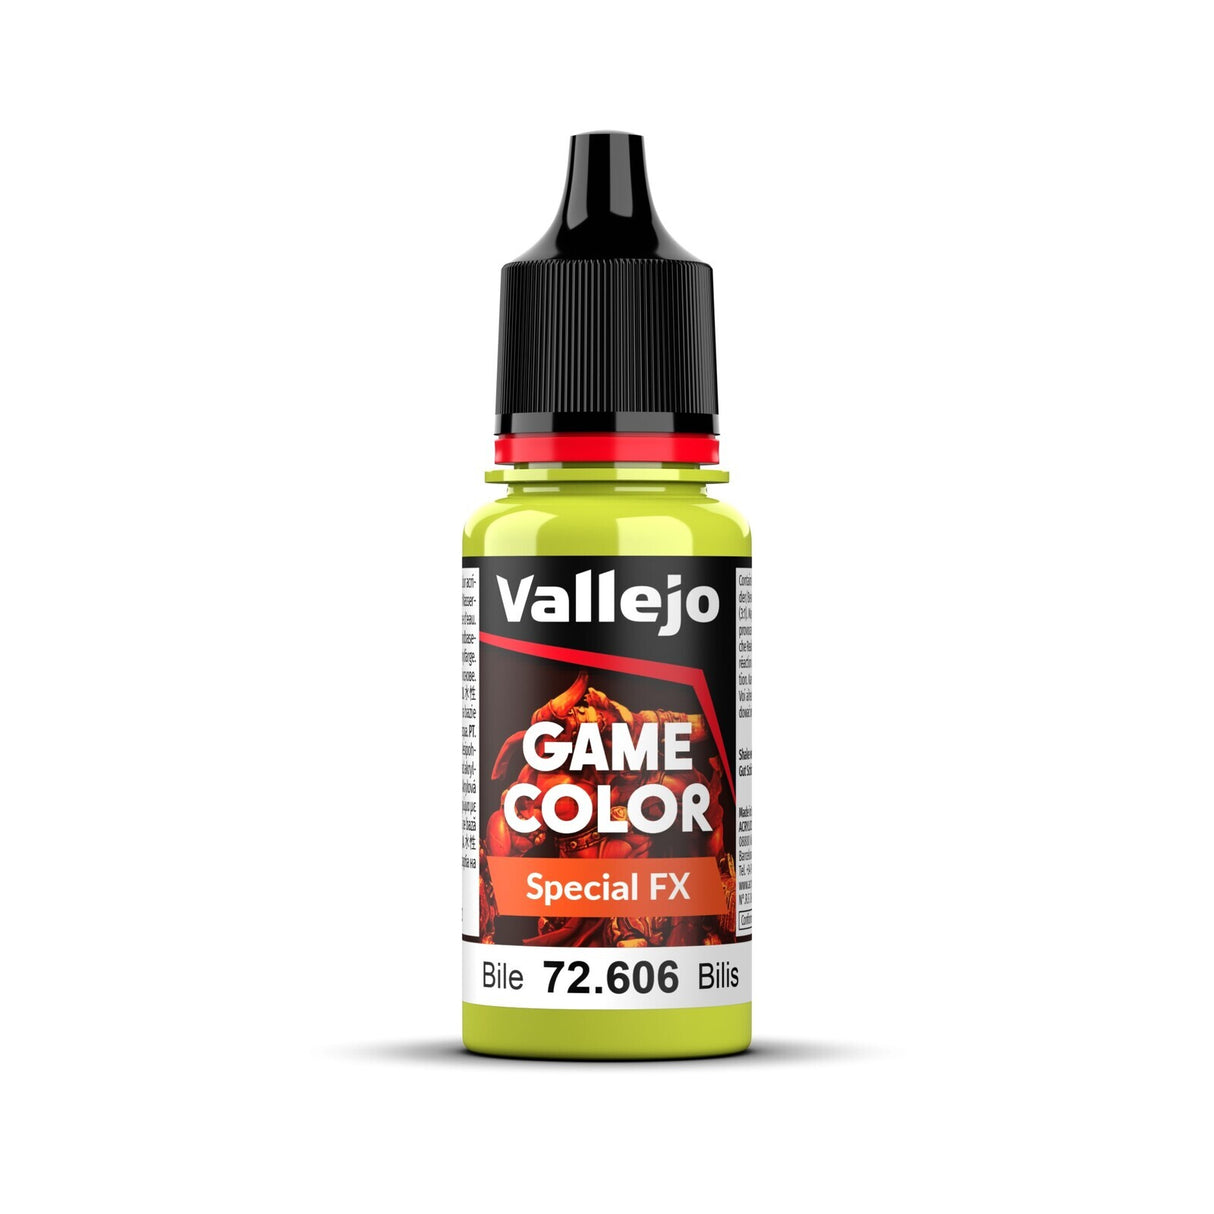 Vallejo Game Color Special FX Bile 18ml Acrylic Paint - Hobbytech Toys